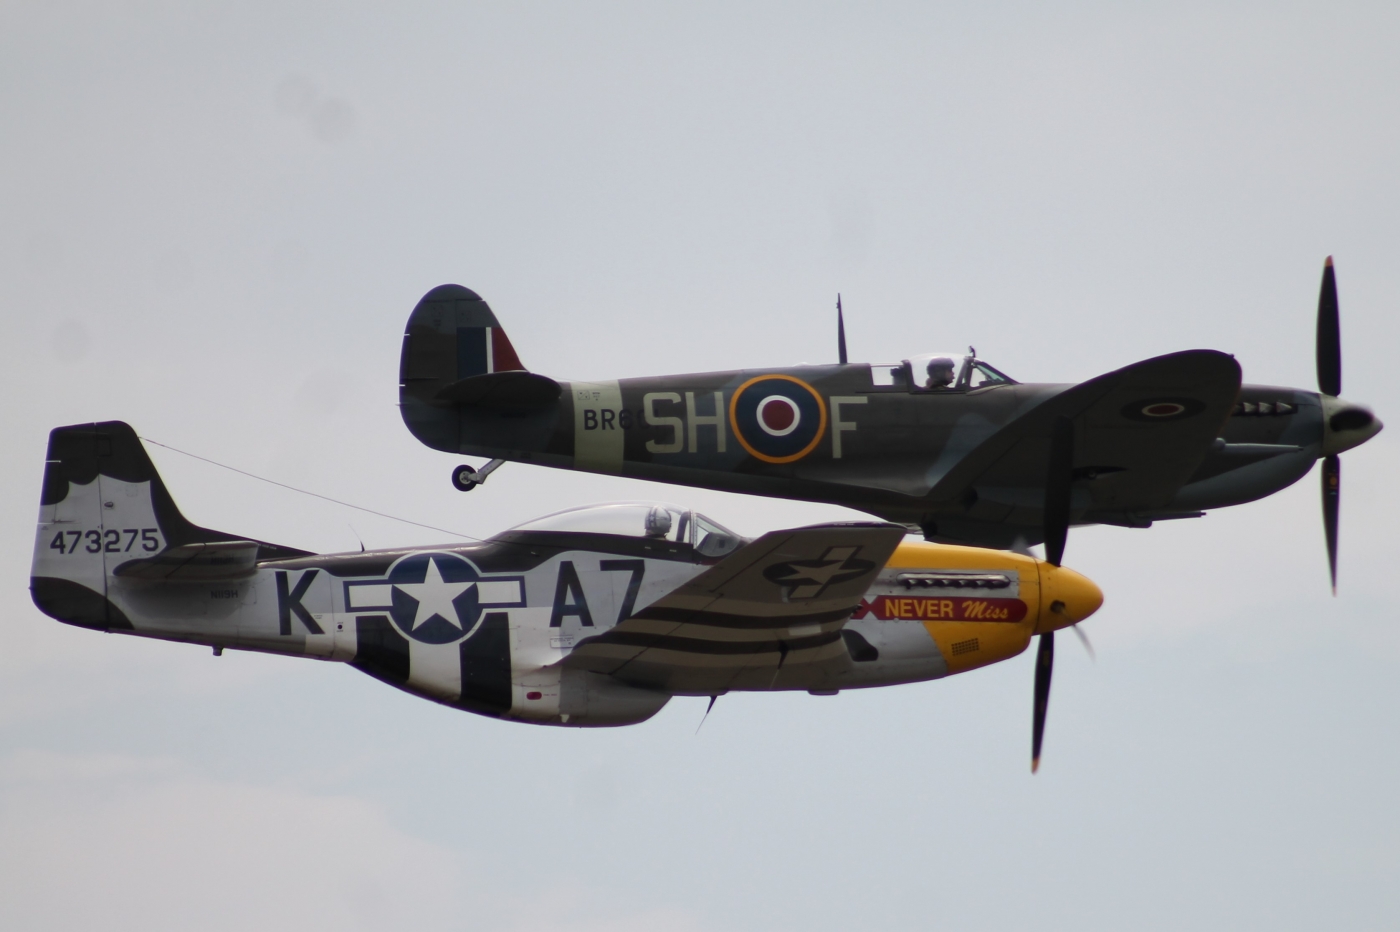 Mustang and Spitfire by James Haney